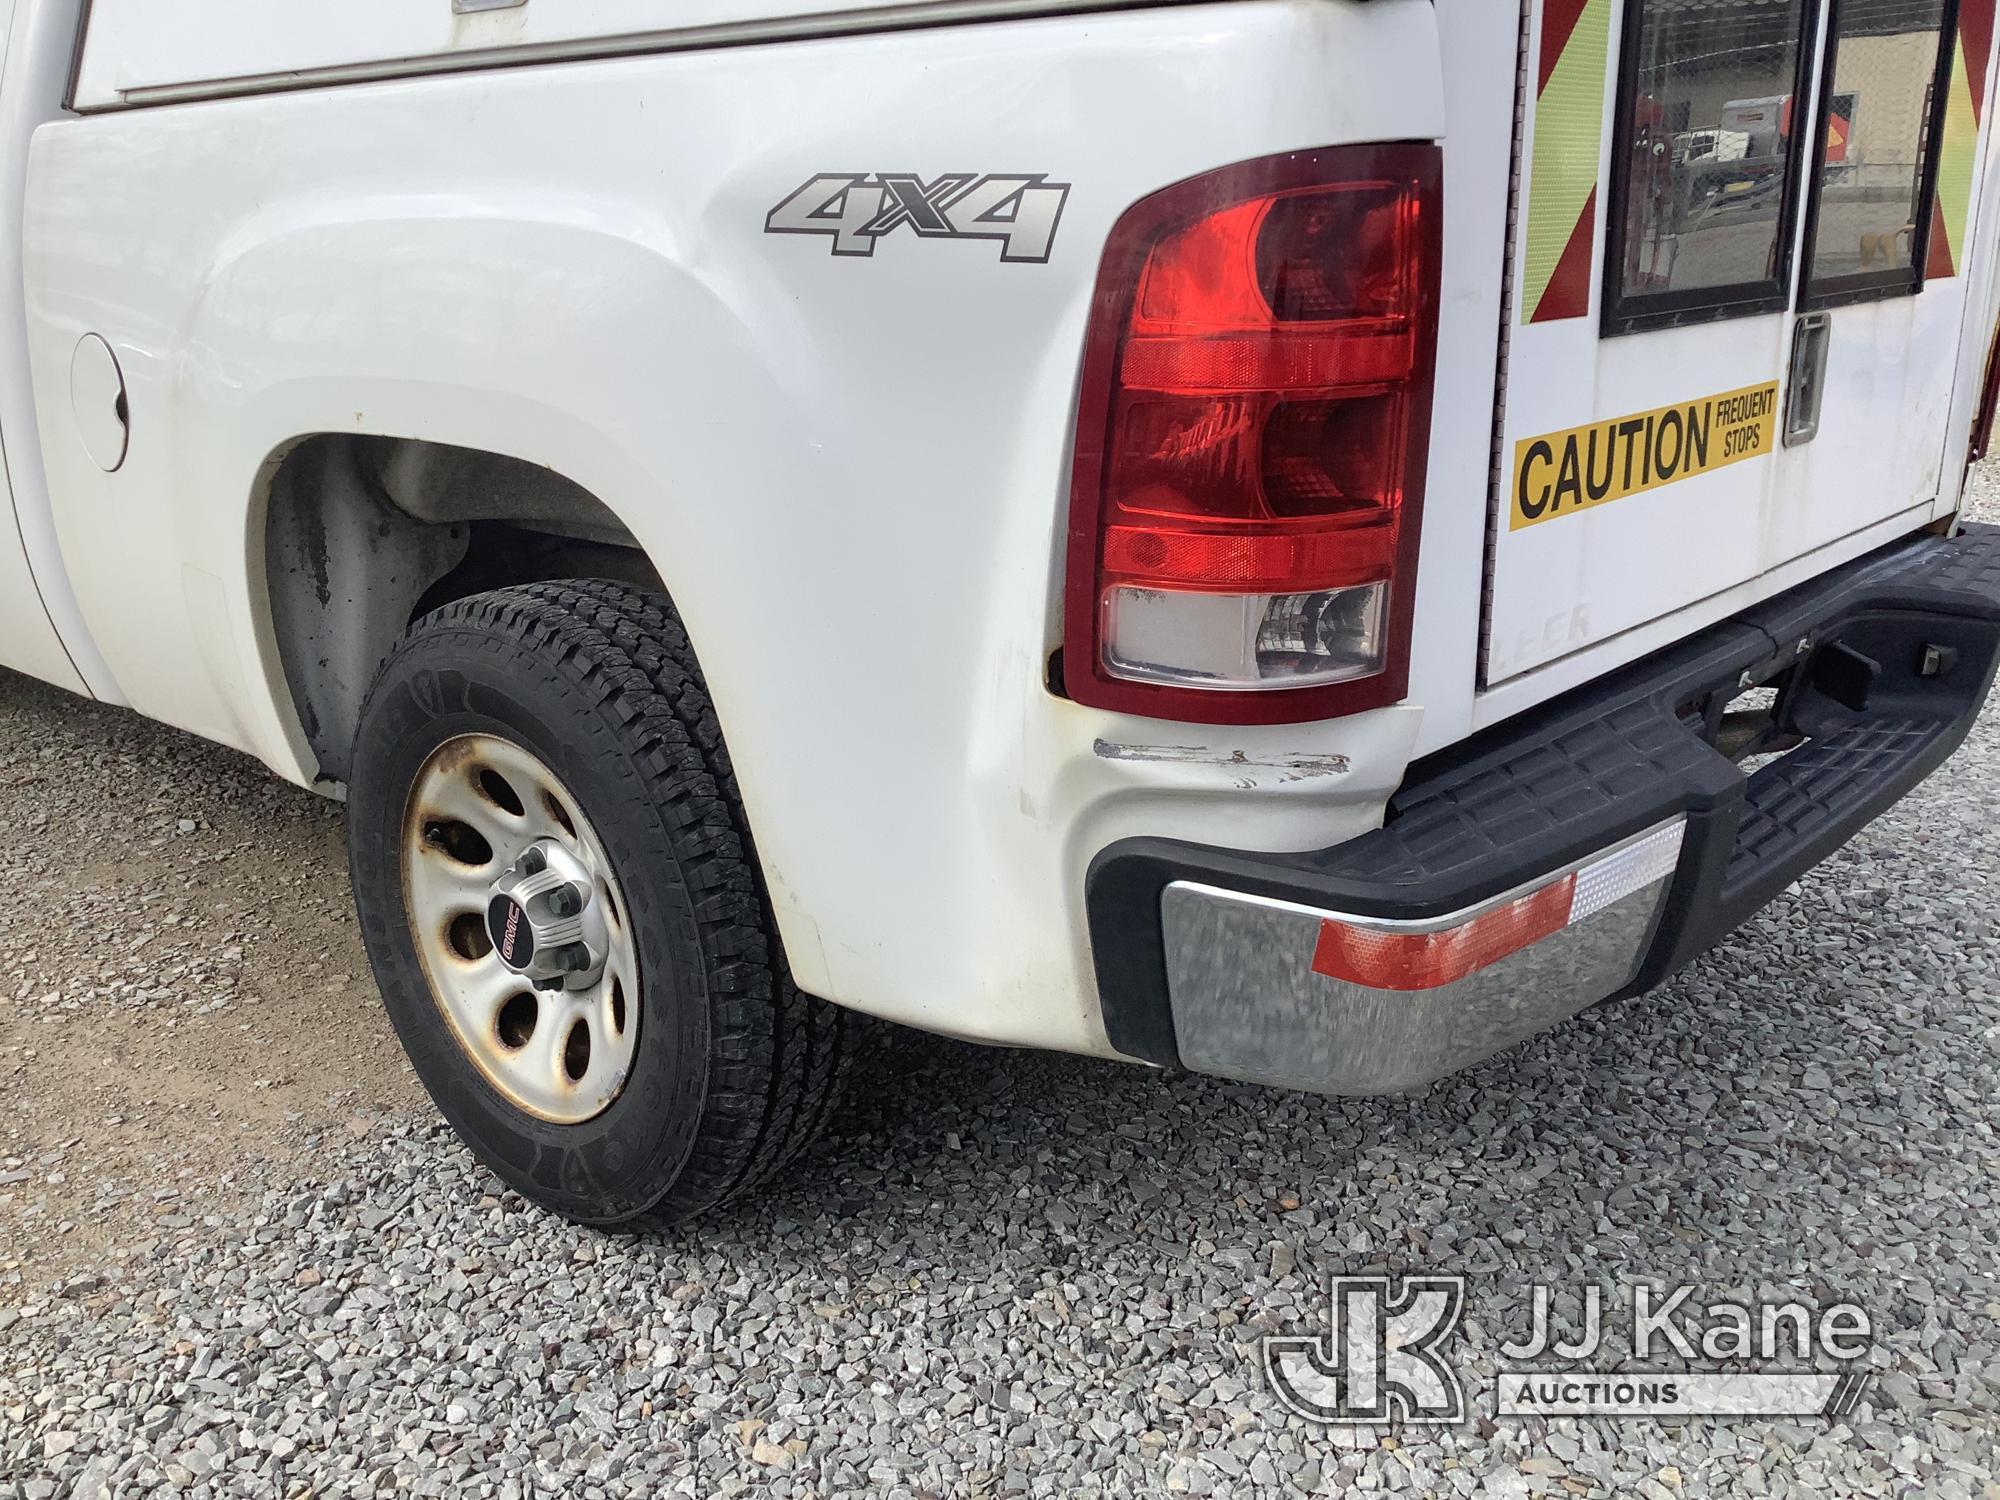 (Smock, PA) 2010 GMC Sierra 1500 4x4 Extended-Cab Pickup Truck Title Delay) (Runs & Moves, Rust & Bo